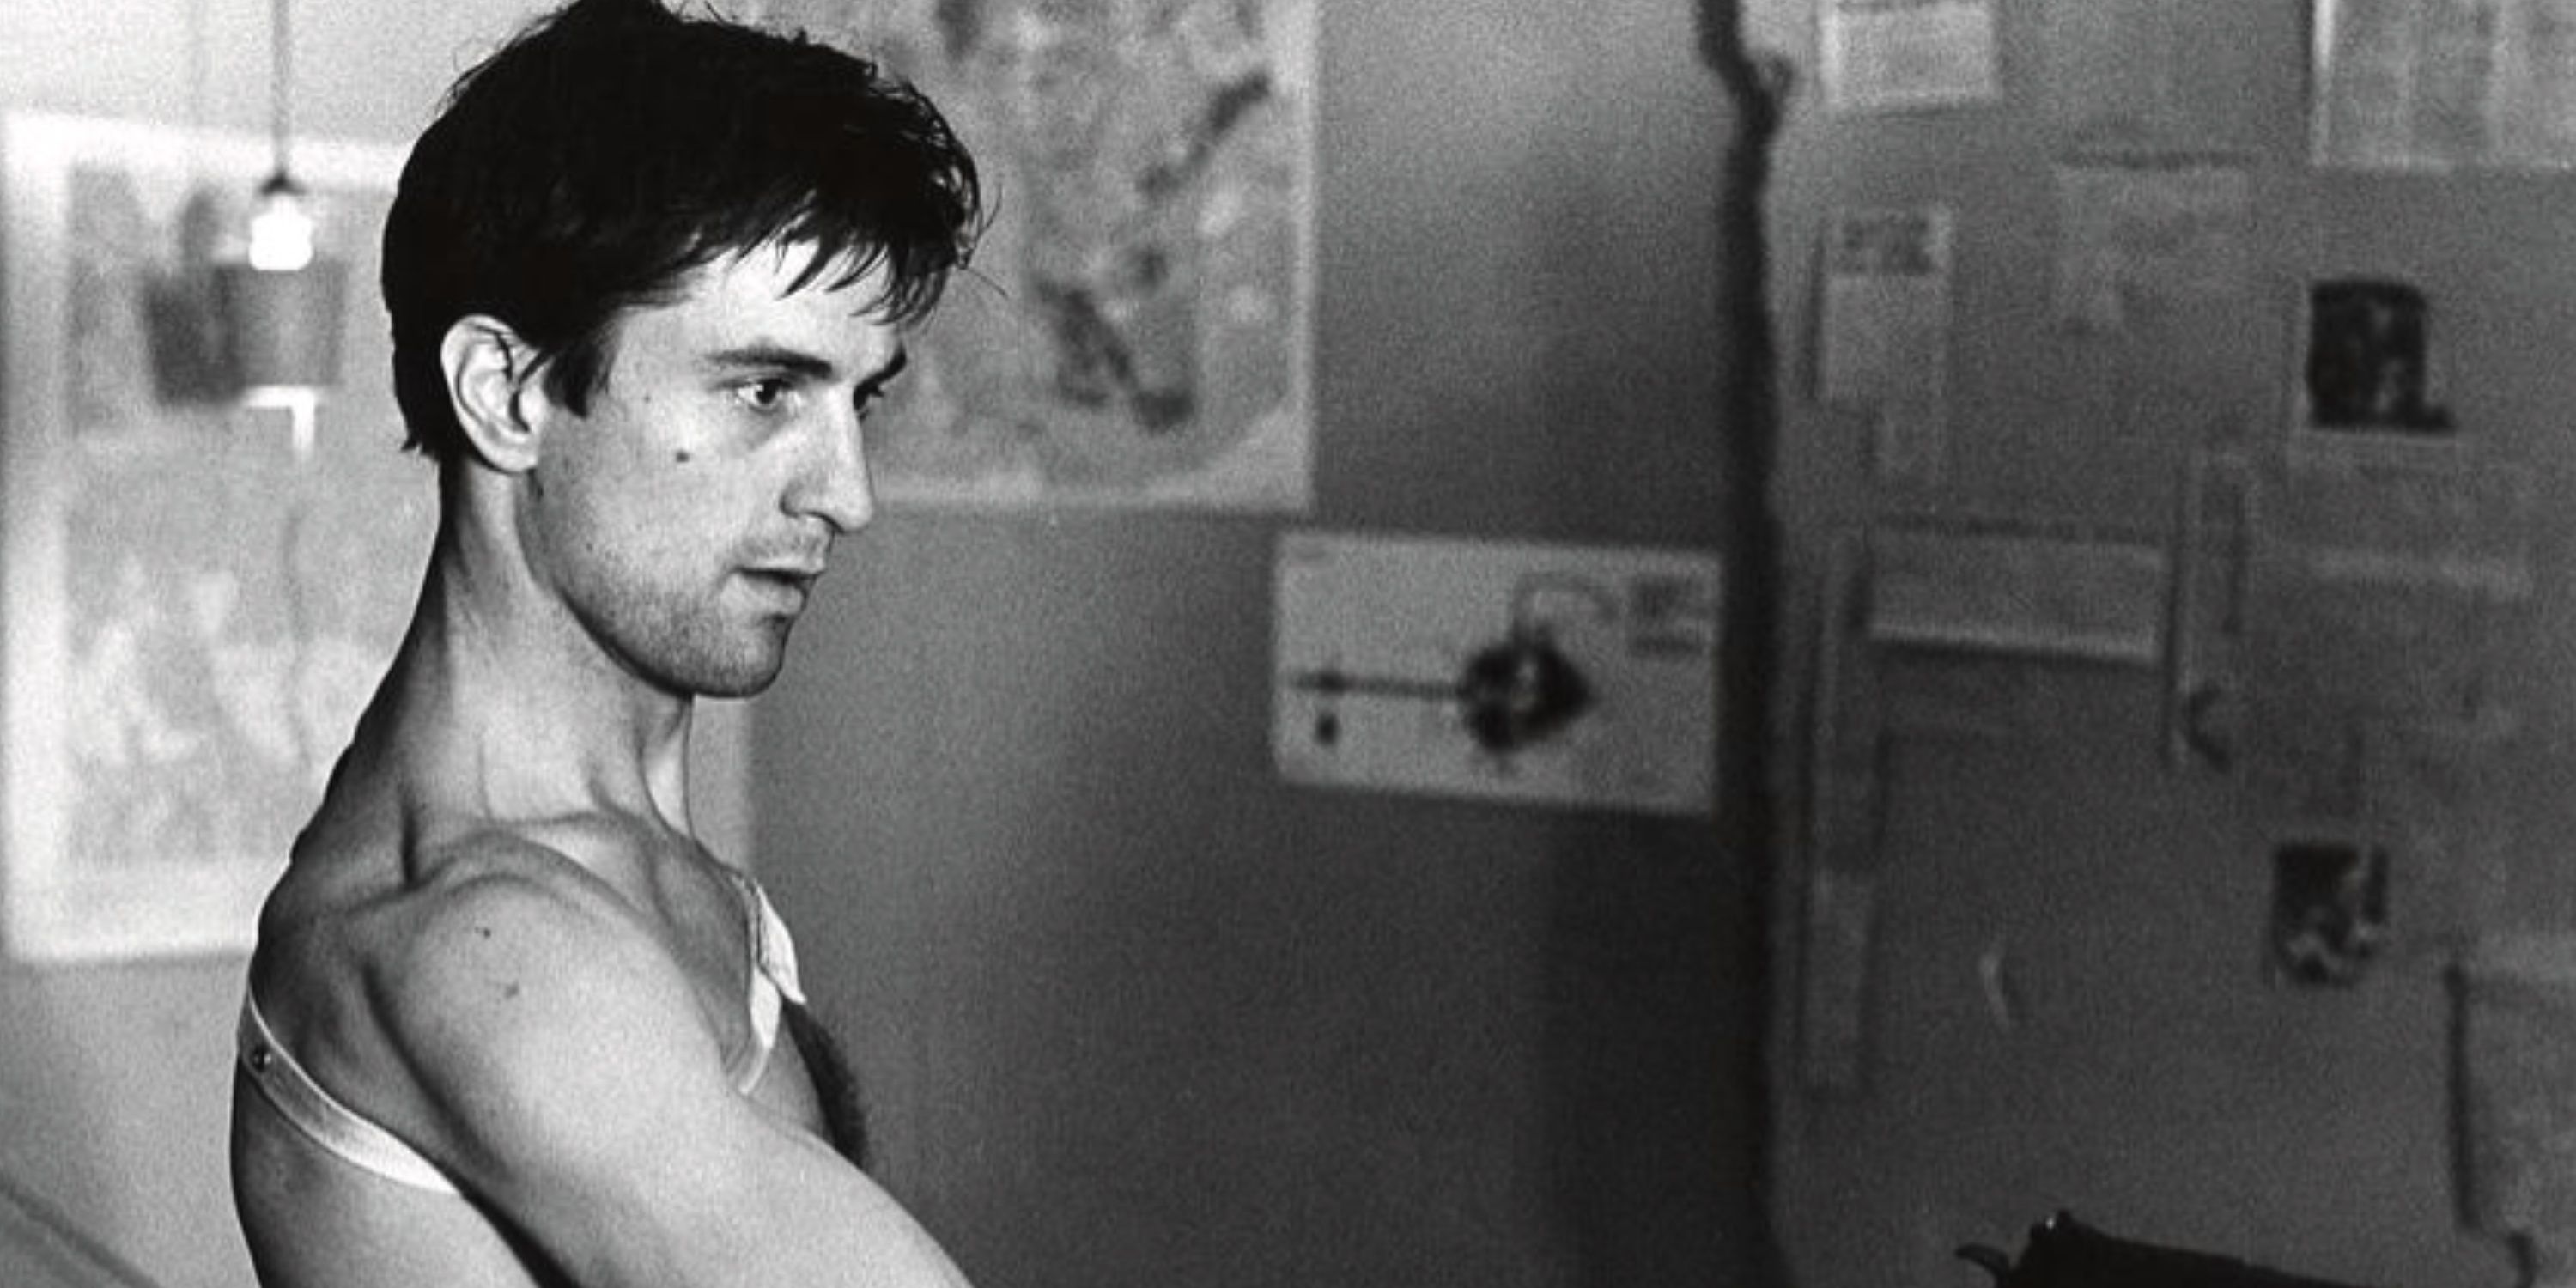 Robert De Niro stares bewilderedly off-screen in the events of Taxi Driver